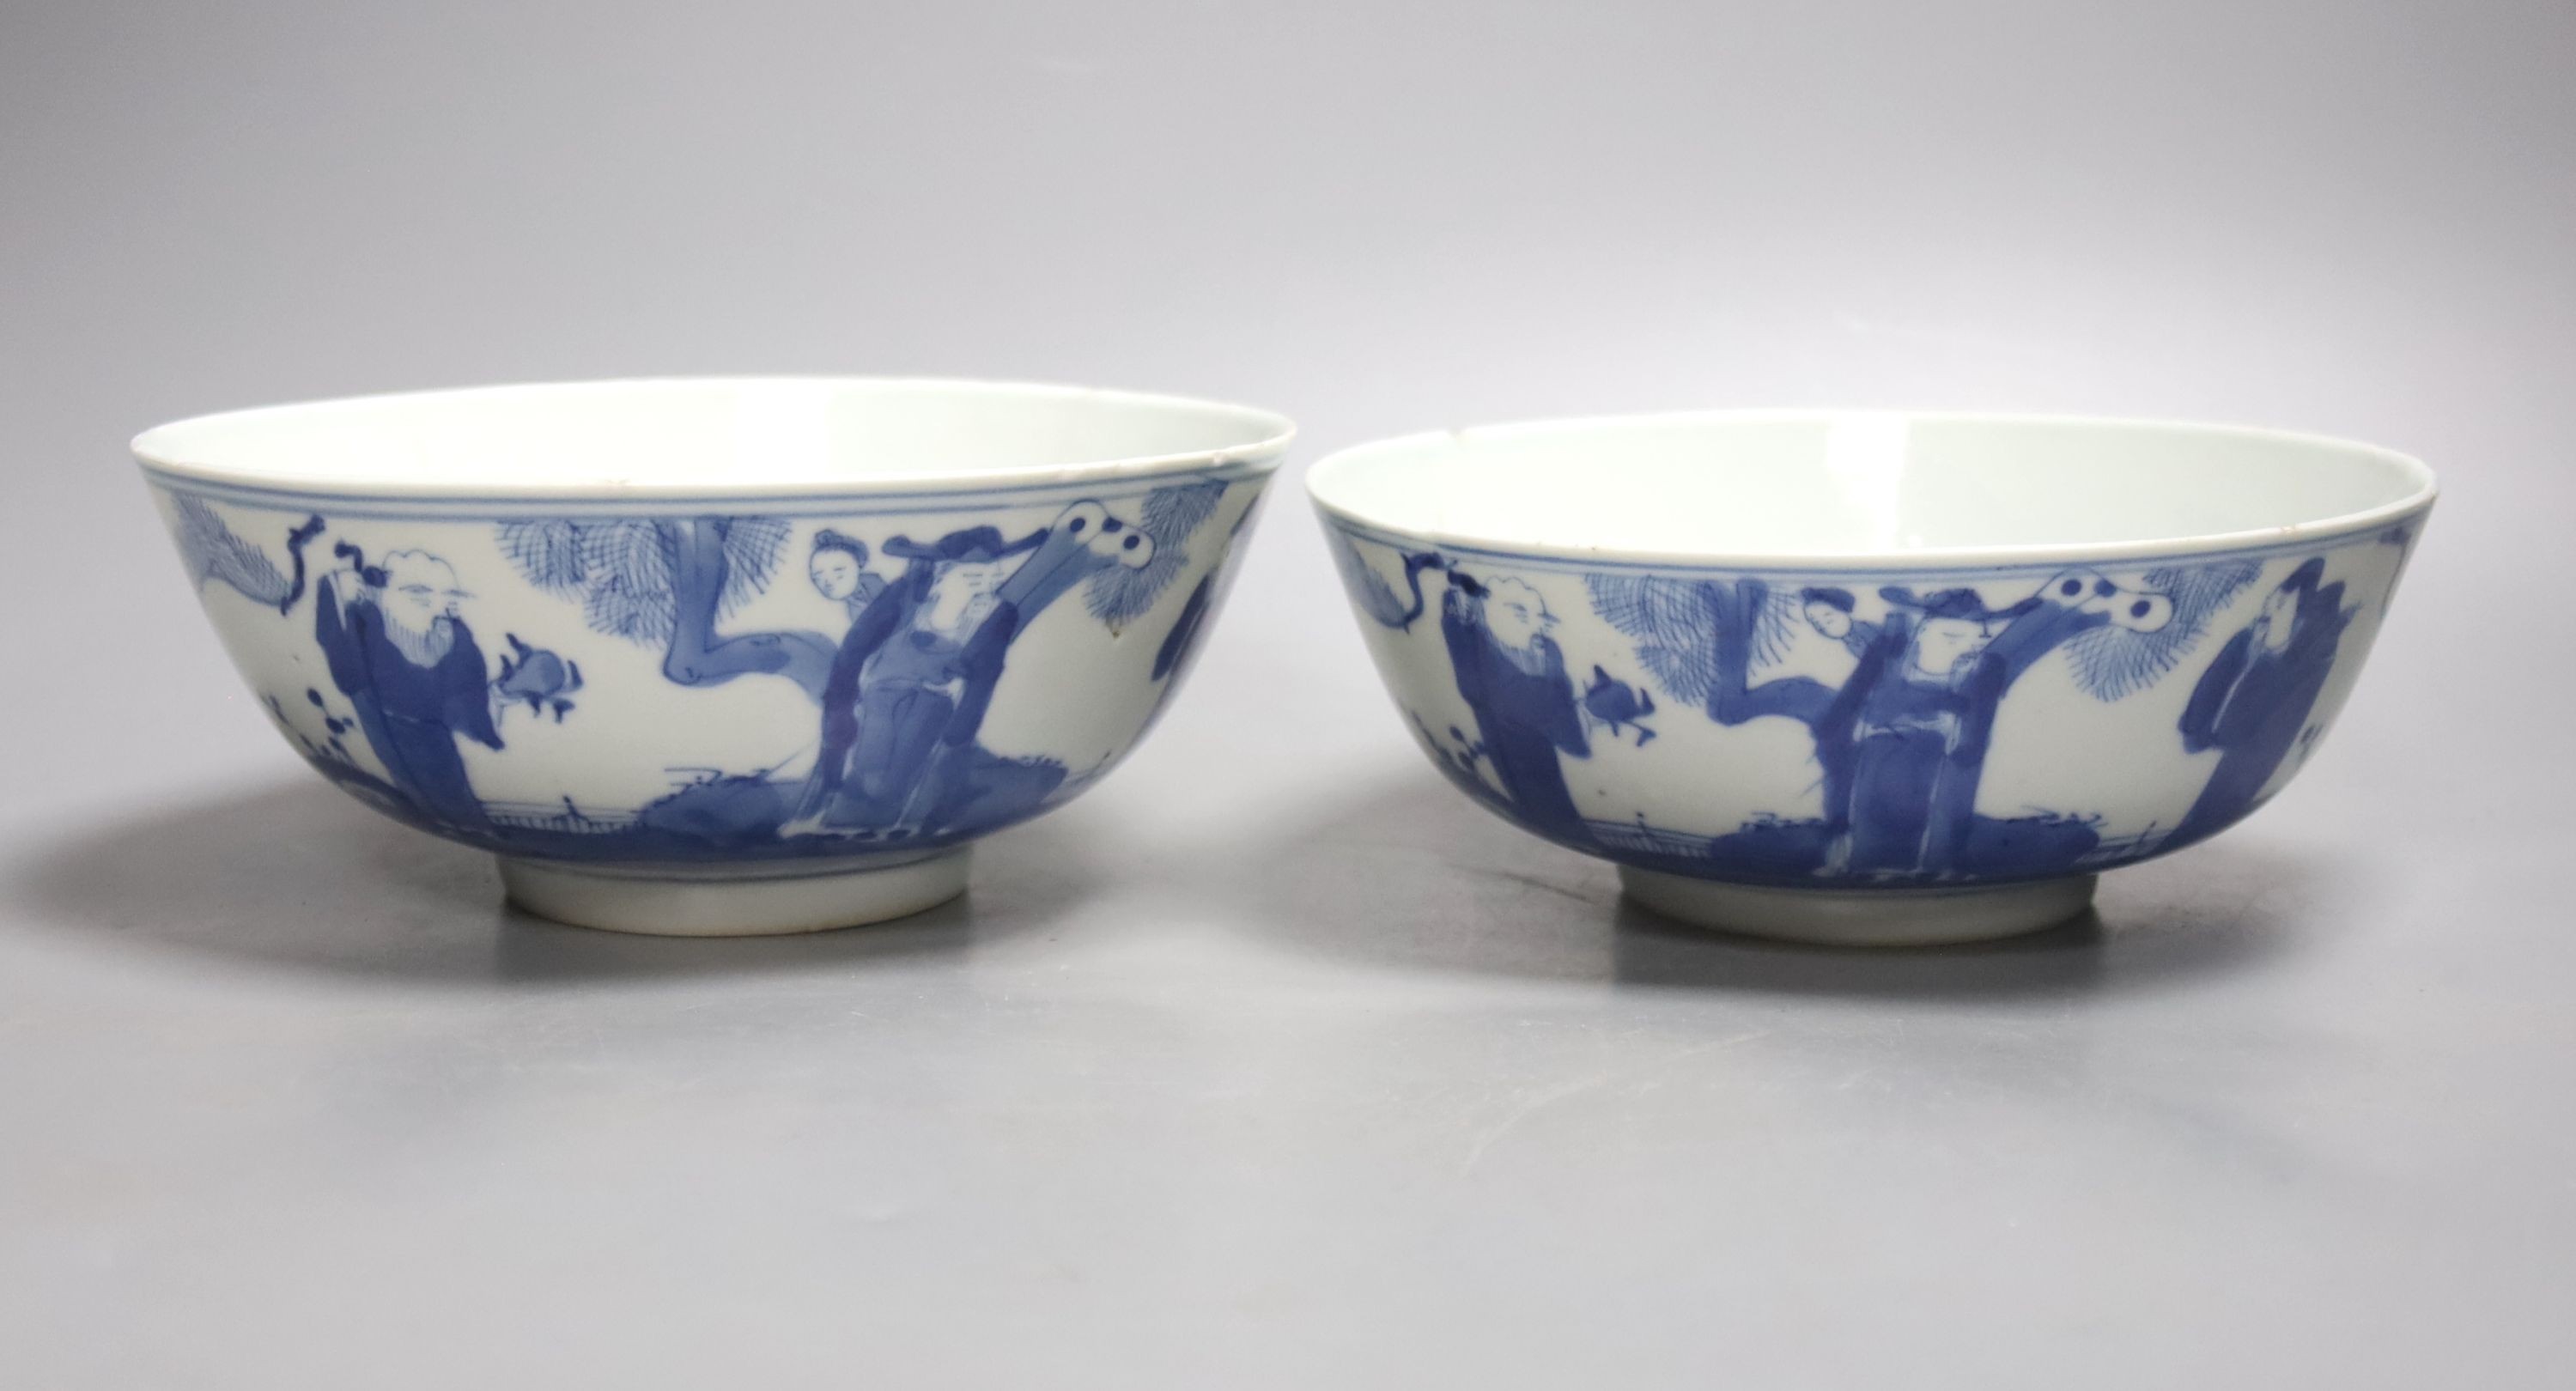 A pair of Chinese blue and white bowls, late 19th / early 20th century, 7in. - a.f.